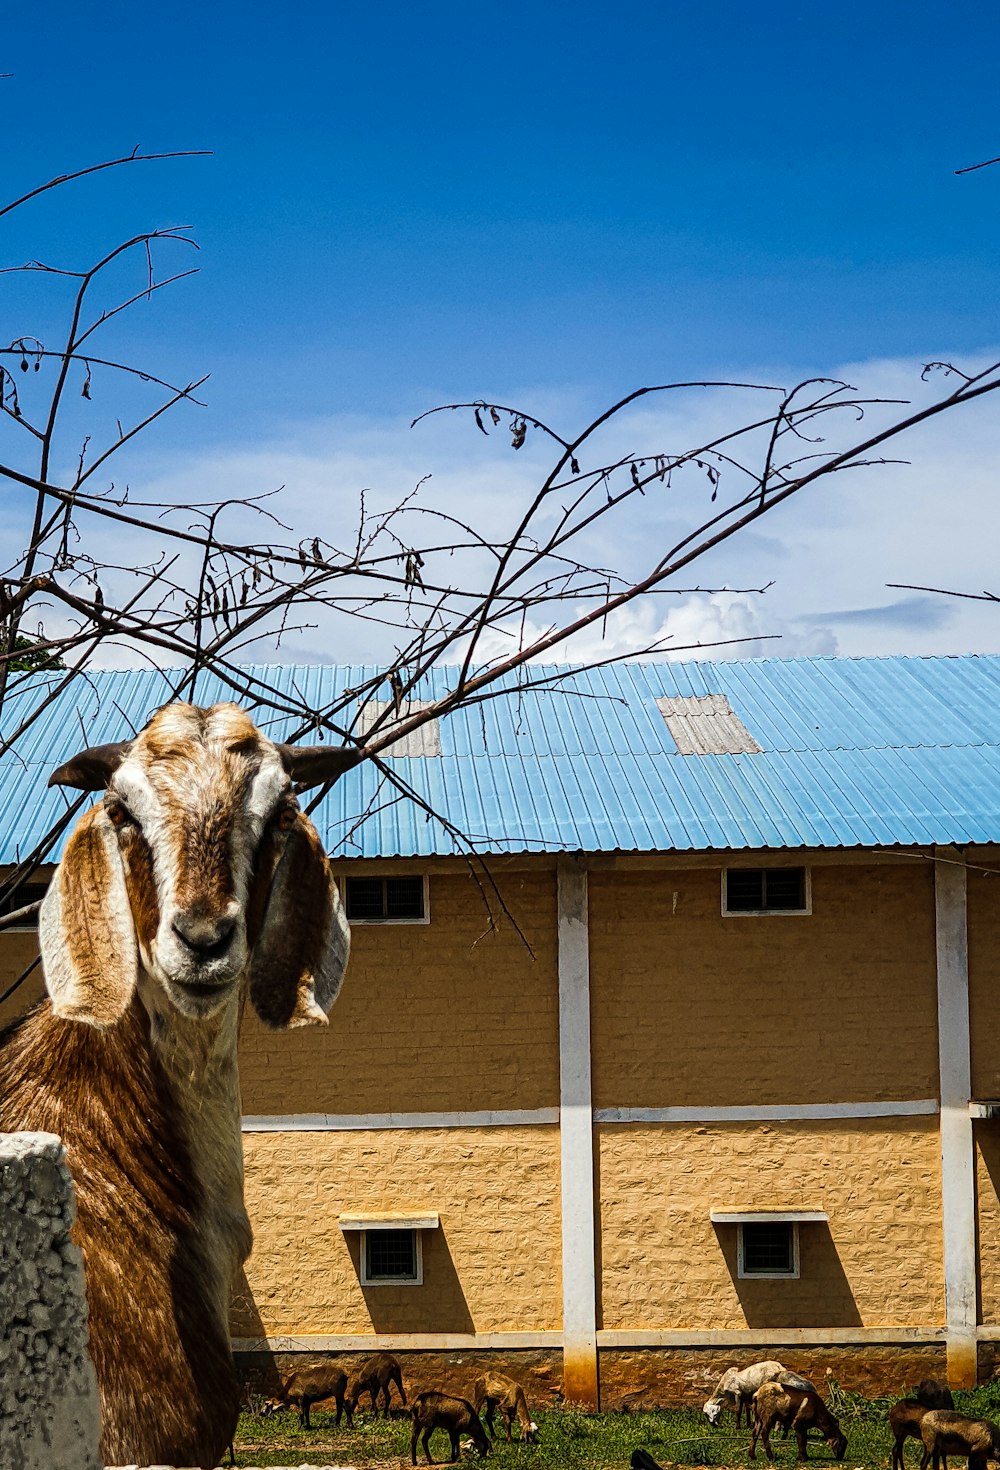 brown and white goat standing front of house